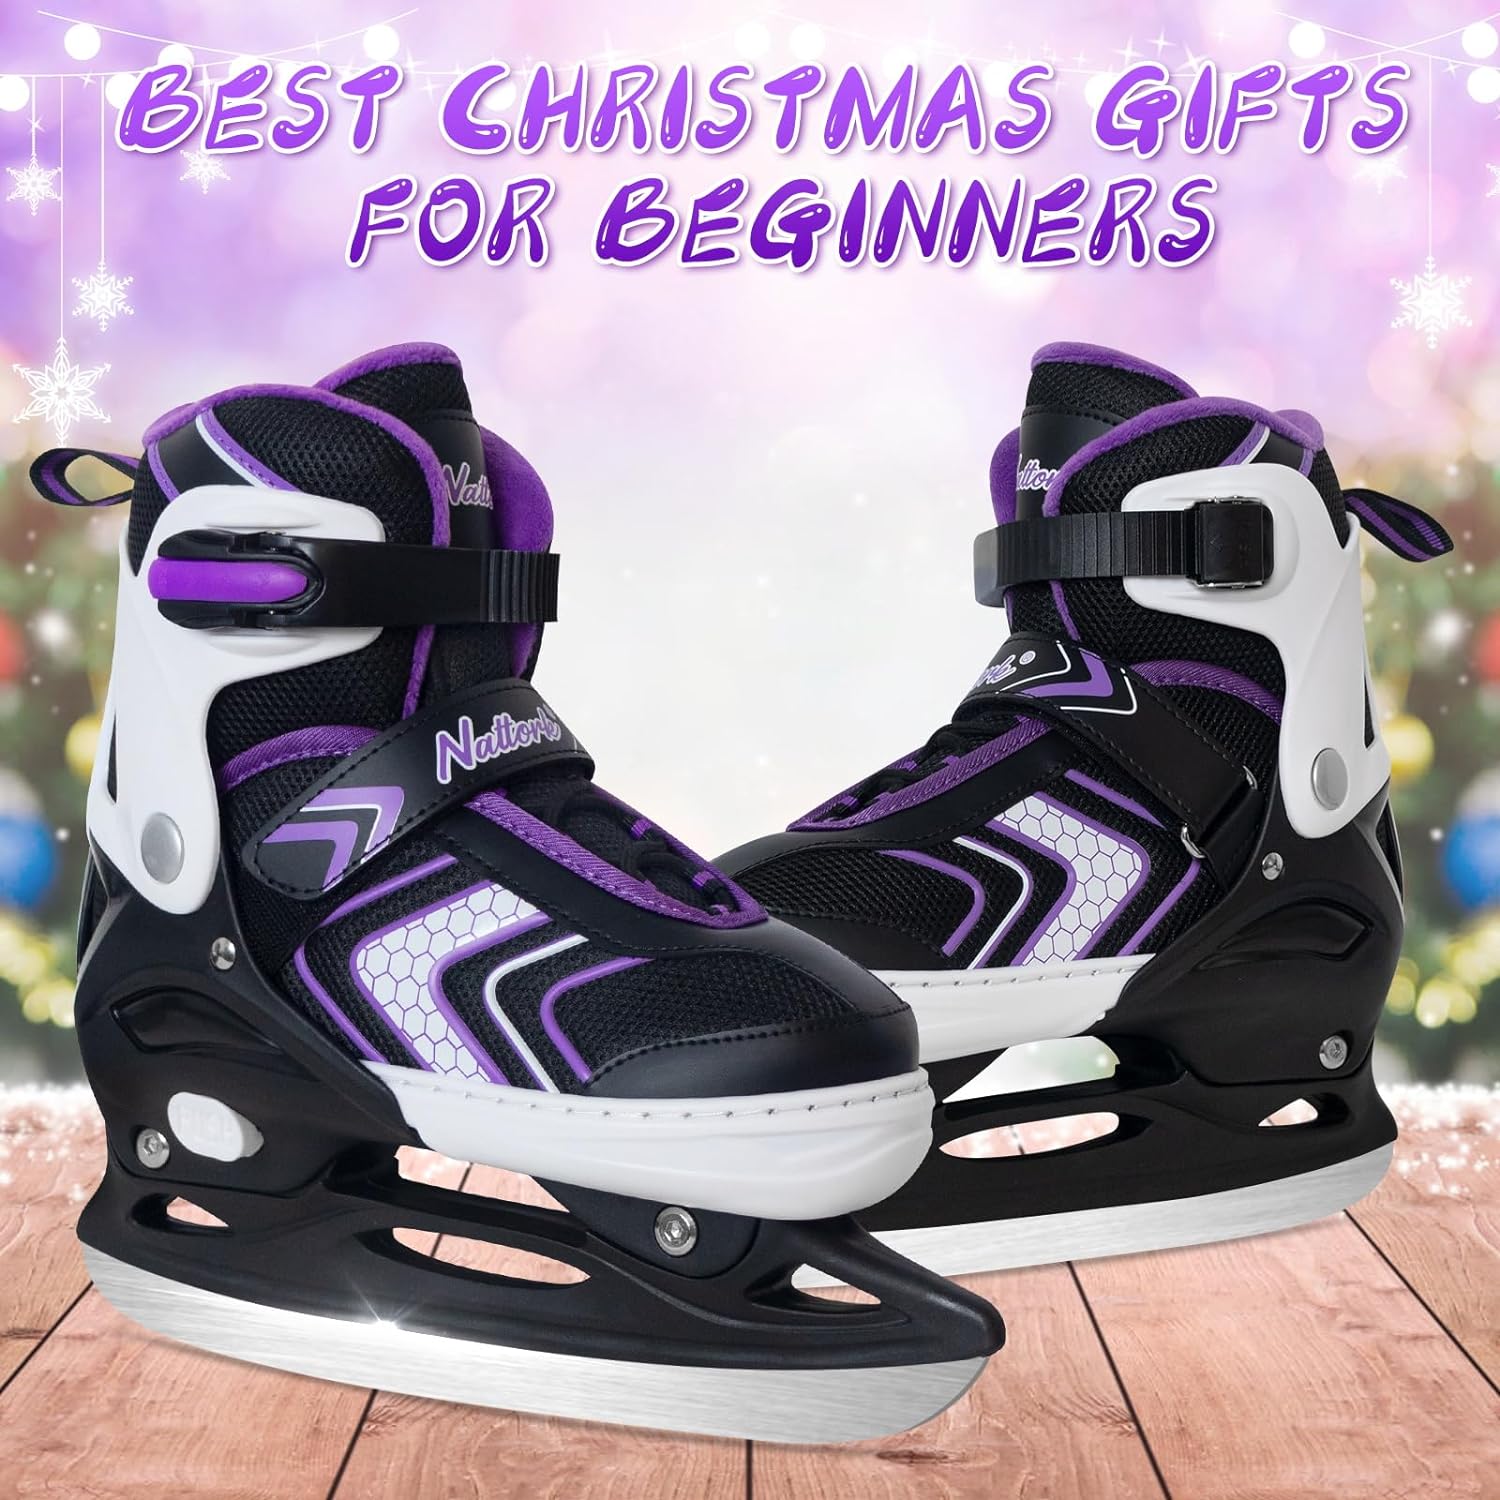 ice skating gifts, ice skating gifts Suppliers and Manufacturers